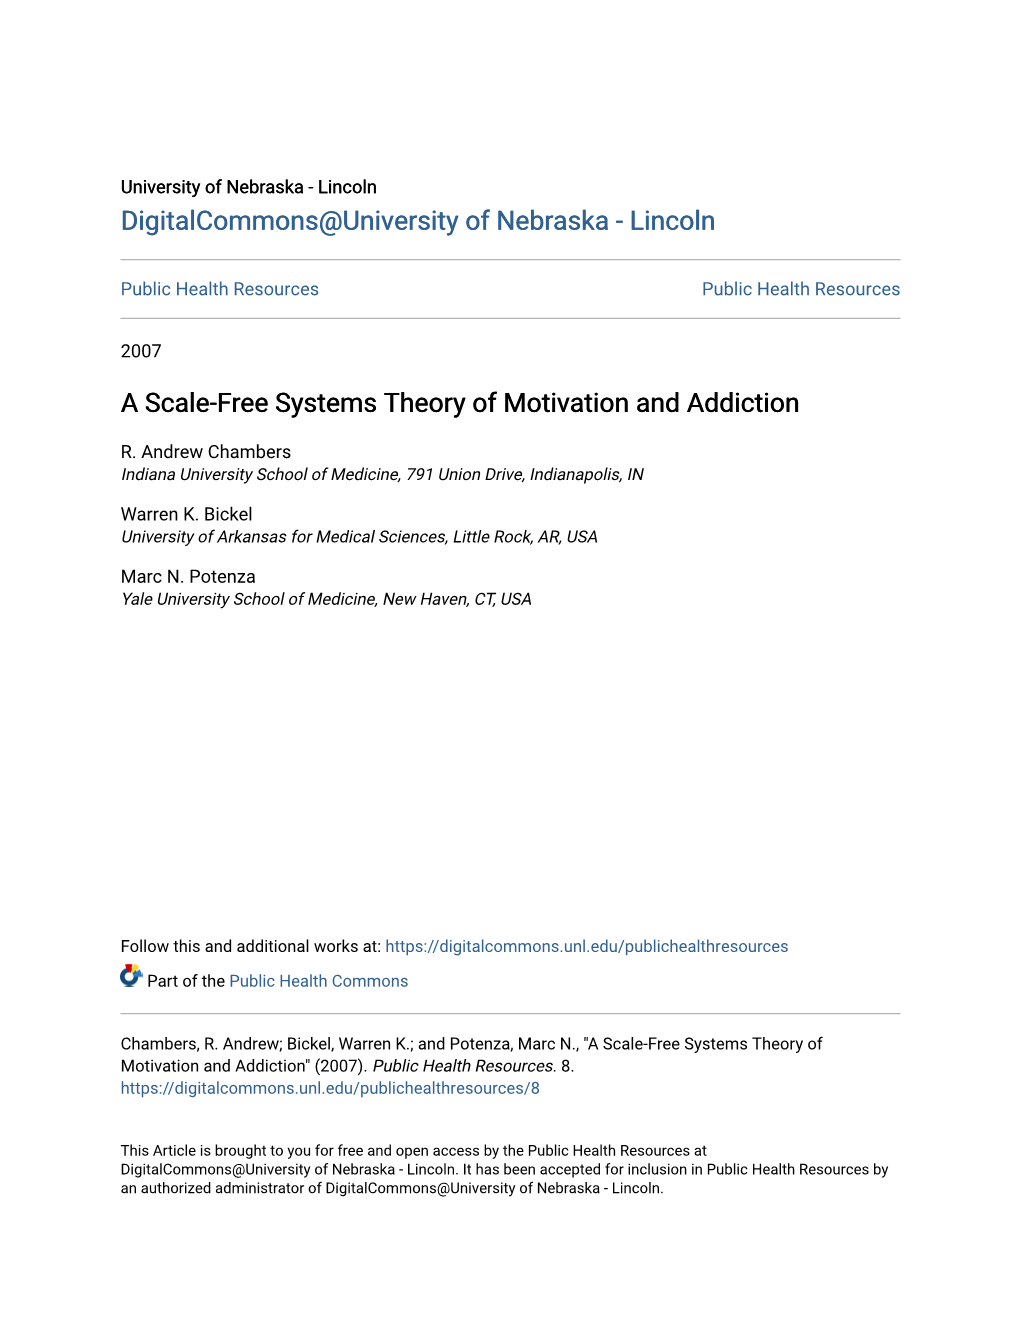 A Scale-Free Systems Theory of Motivation and Addiction